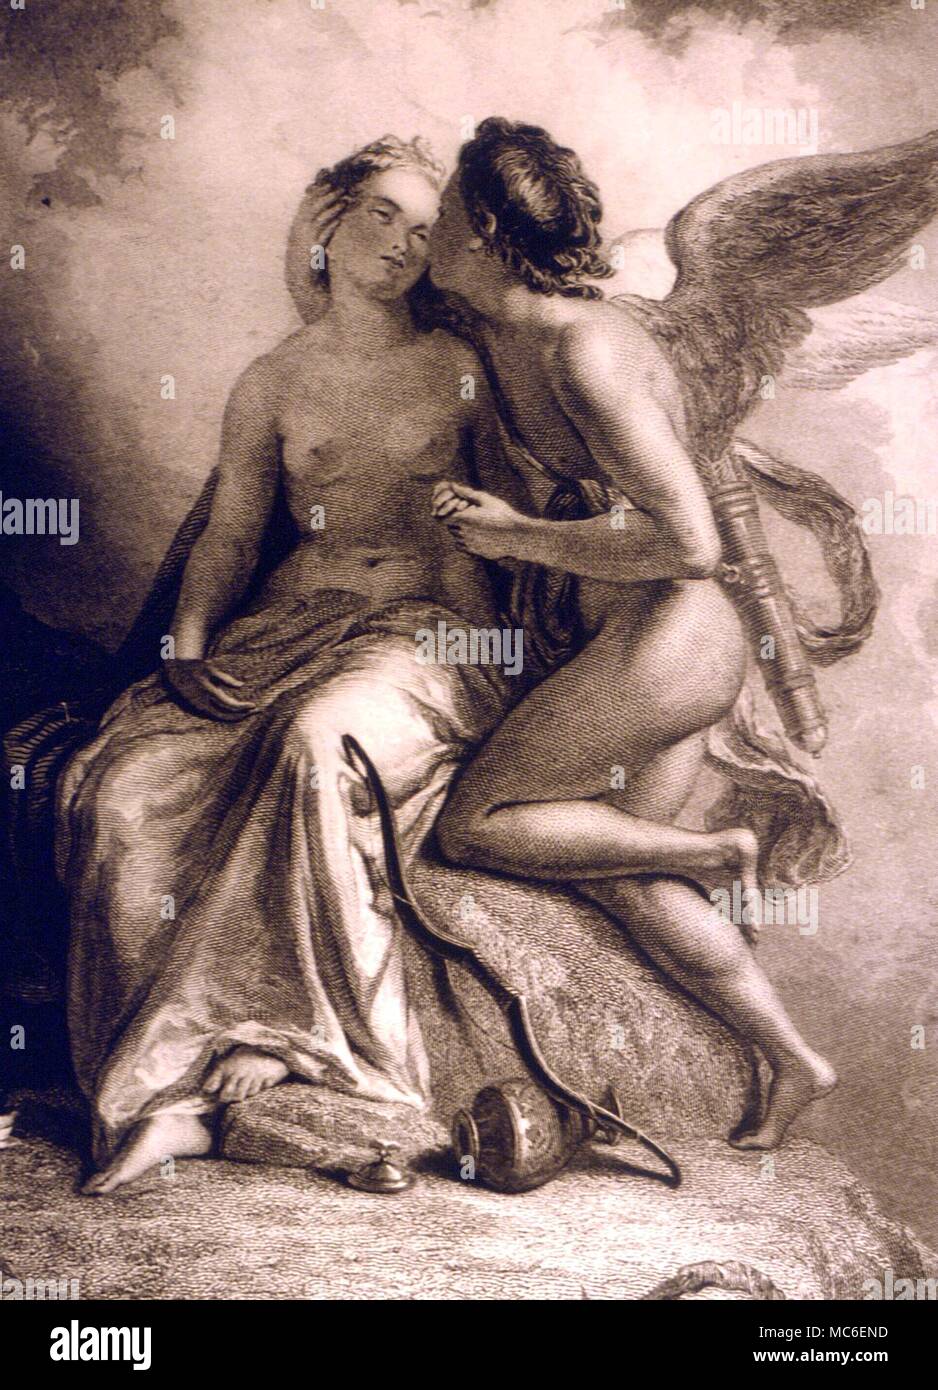 Mythology - Cupid and Psyche. Cupid embracing the Soul, Psyche. painting by J Uwins, engraved by I Stocks. The Art Journal, 1855 Stock Photo